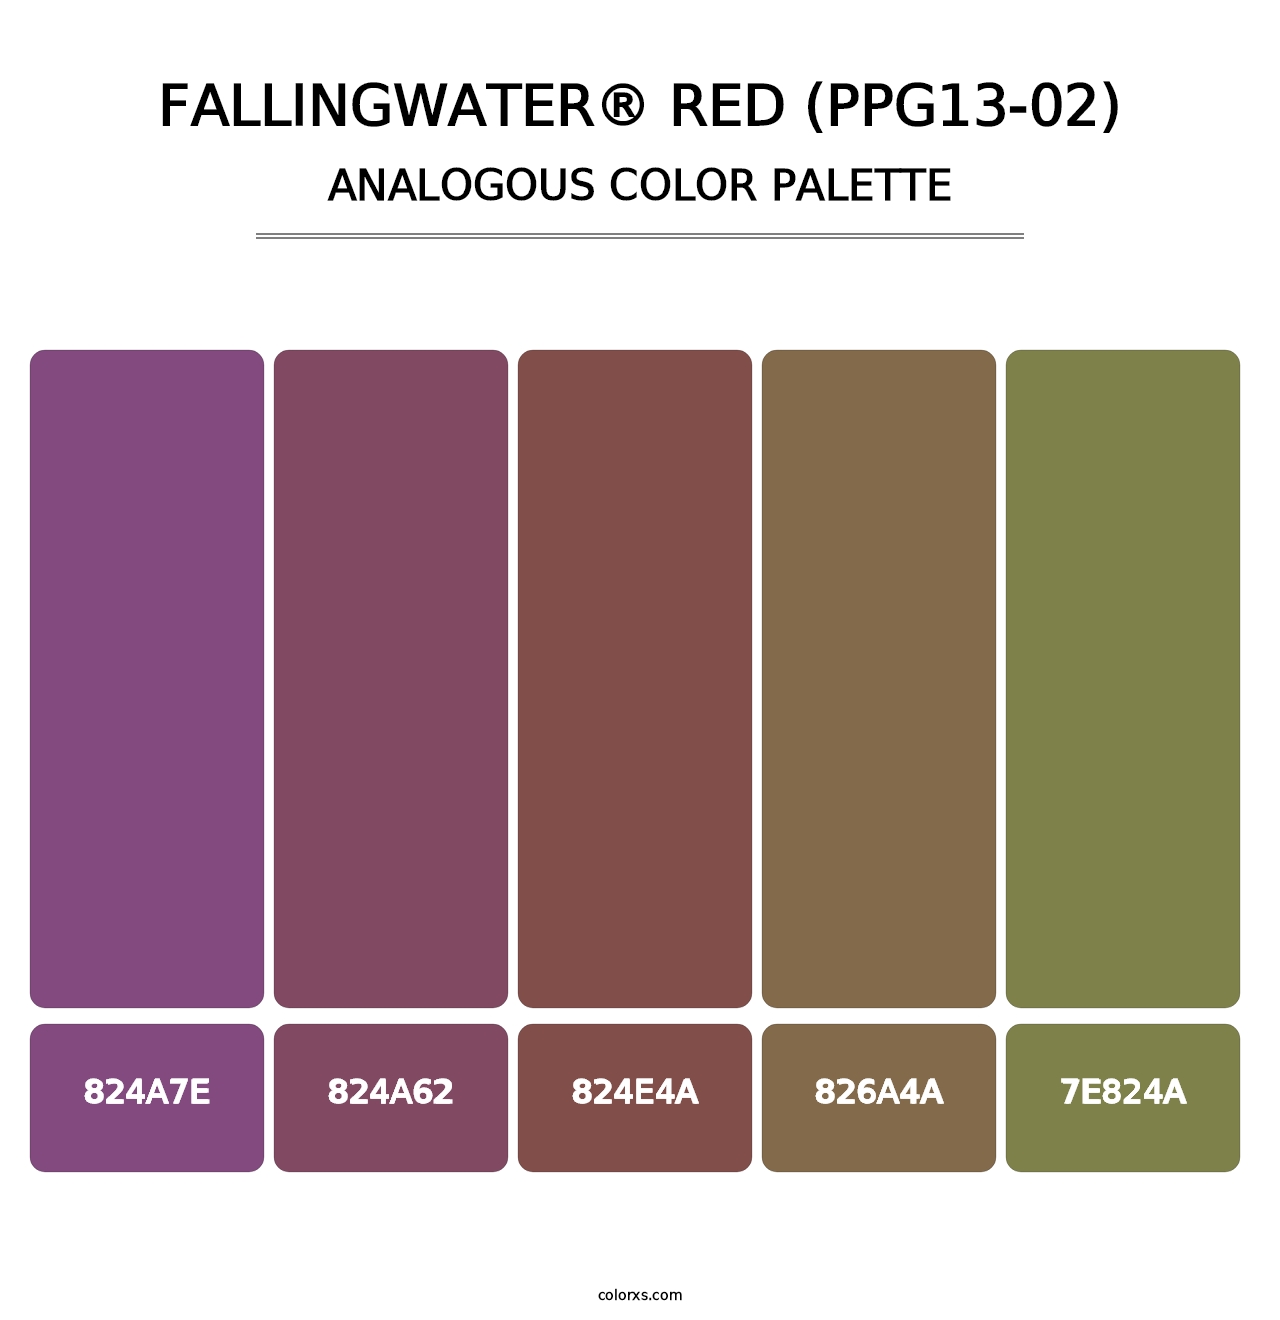 Fallingwater® Red (PPG13-02) - Analogous Color Palette